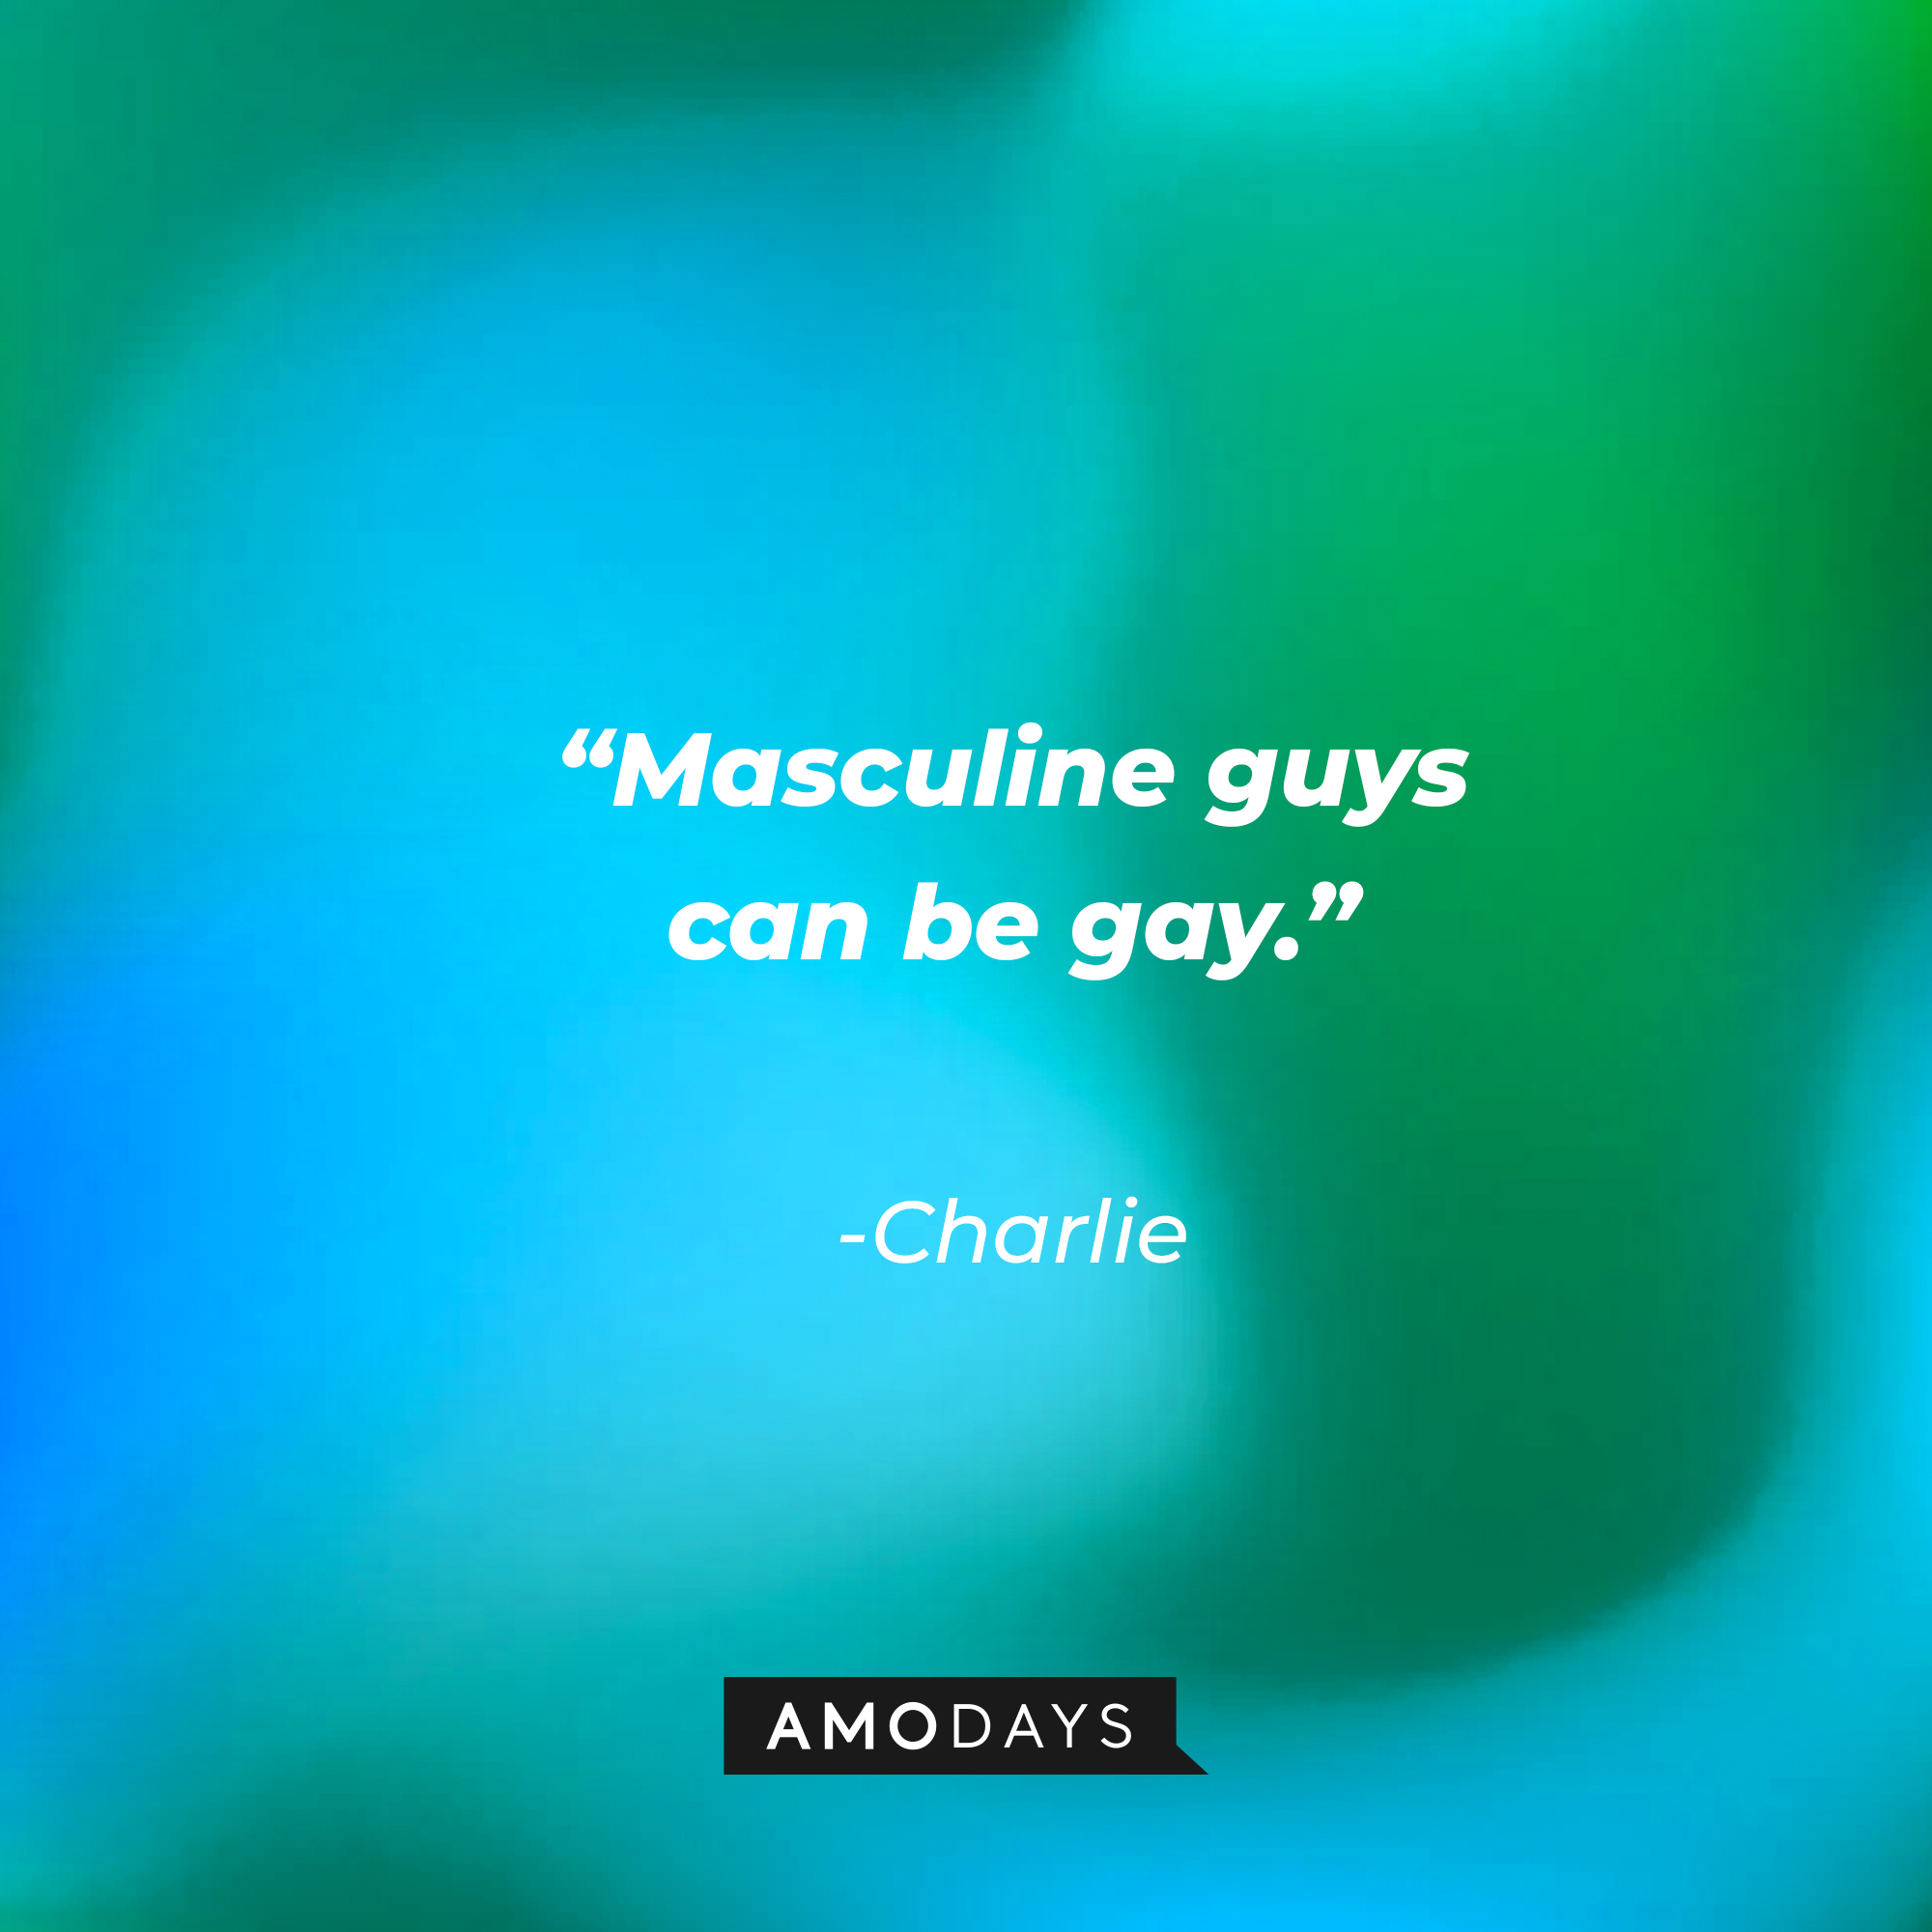 Charlie’s quote: “Masculine guys can be gay.” | Source: AmoDays